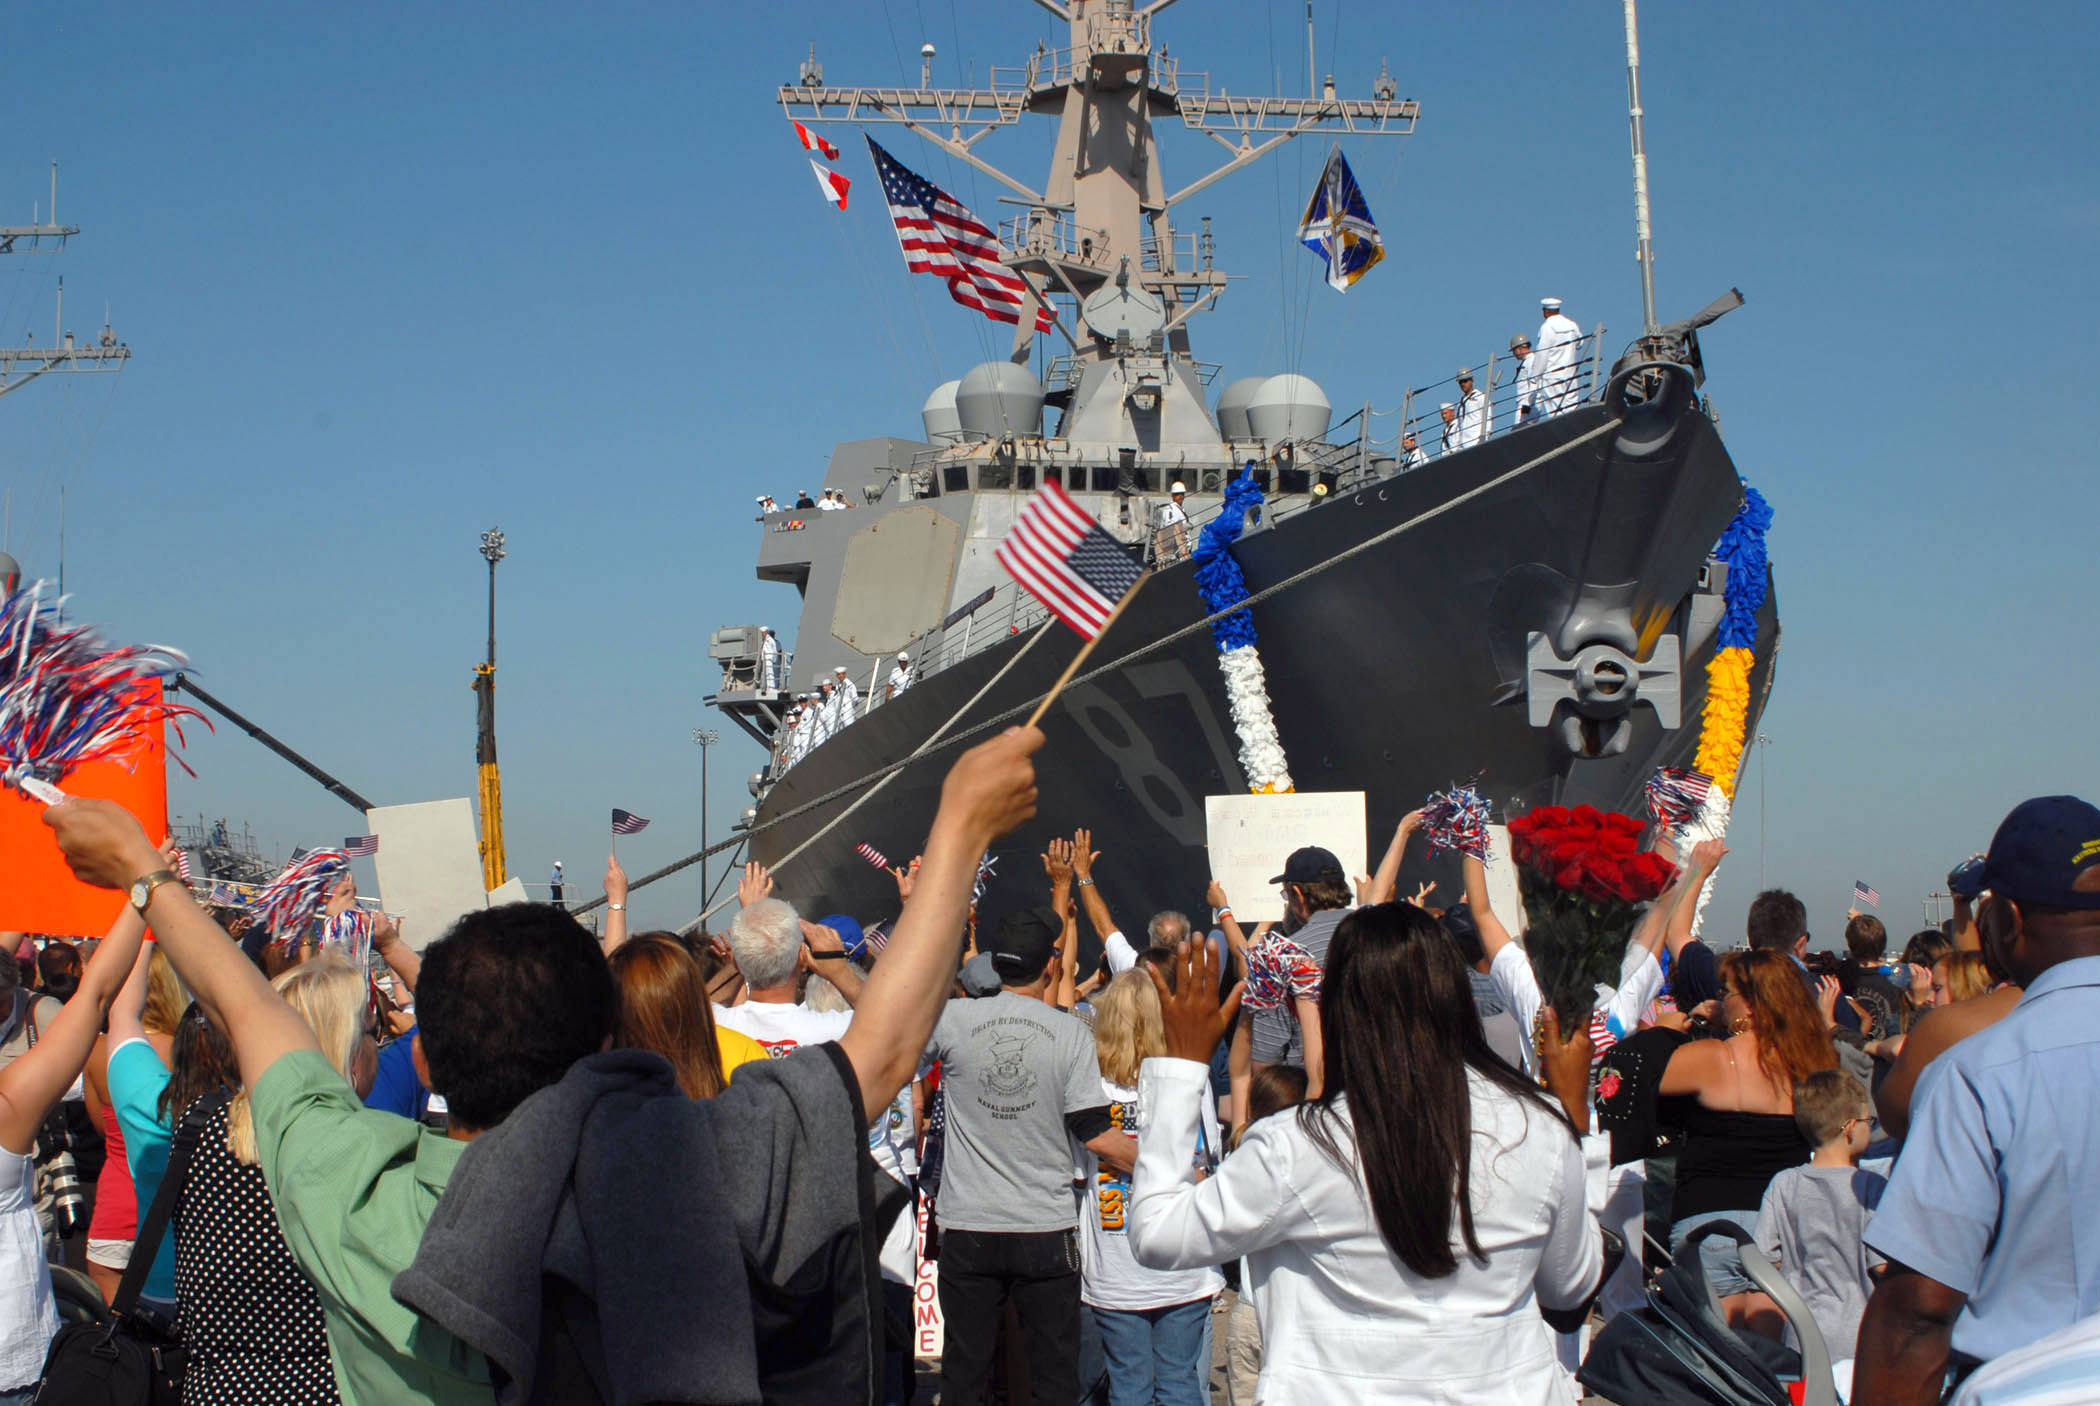 US_Navy_070523-N-7653W-117_Family_and_friends_welcome_home_Sailors_assigned_to_guided-missile_destroyer_USS_Mason_(DDG_87)_as_they_return_to_Naval_Station_Norfolk_after_the_longest_deployment_by_a_carrier_strike_group_since_200.jpg